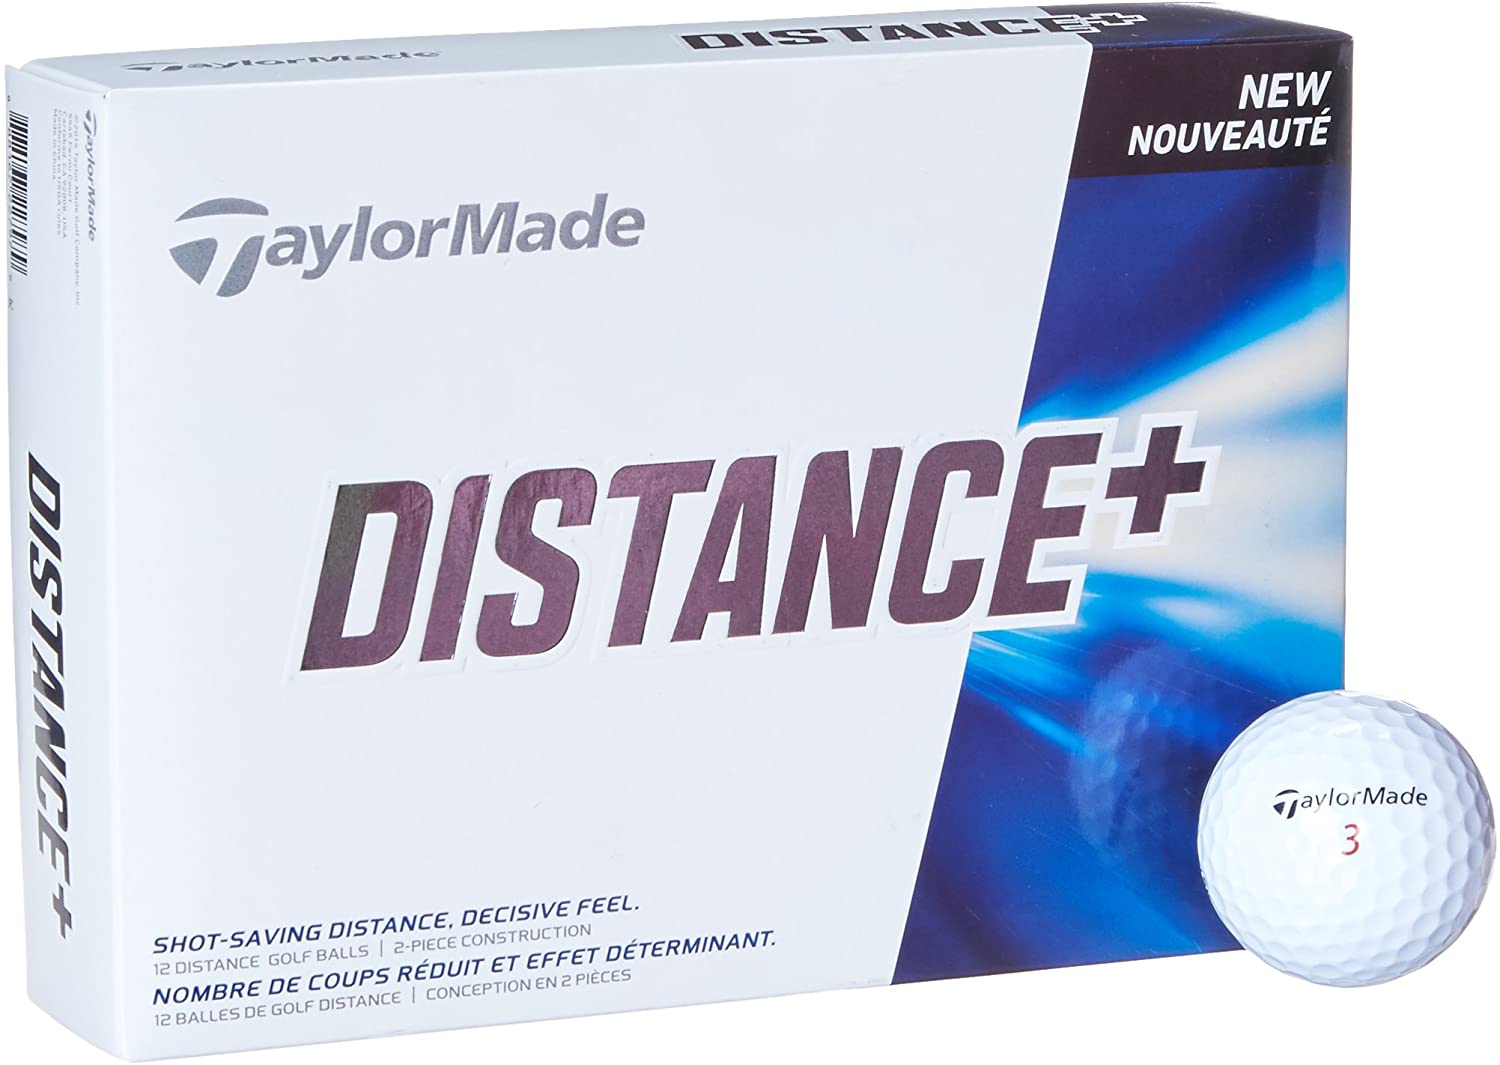 "Taylormade Distance Plus